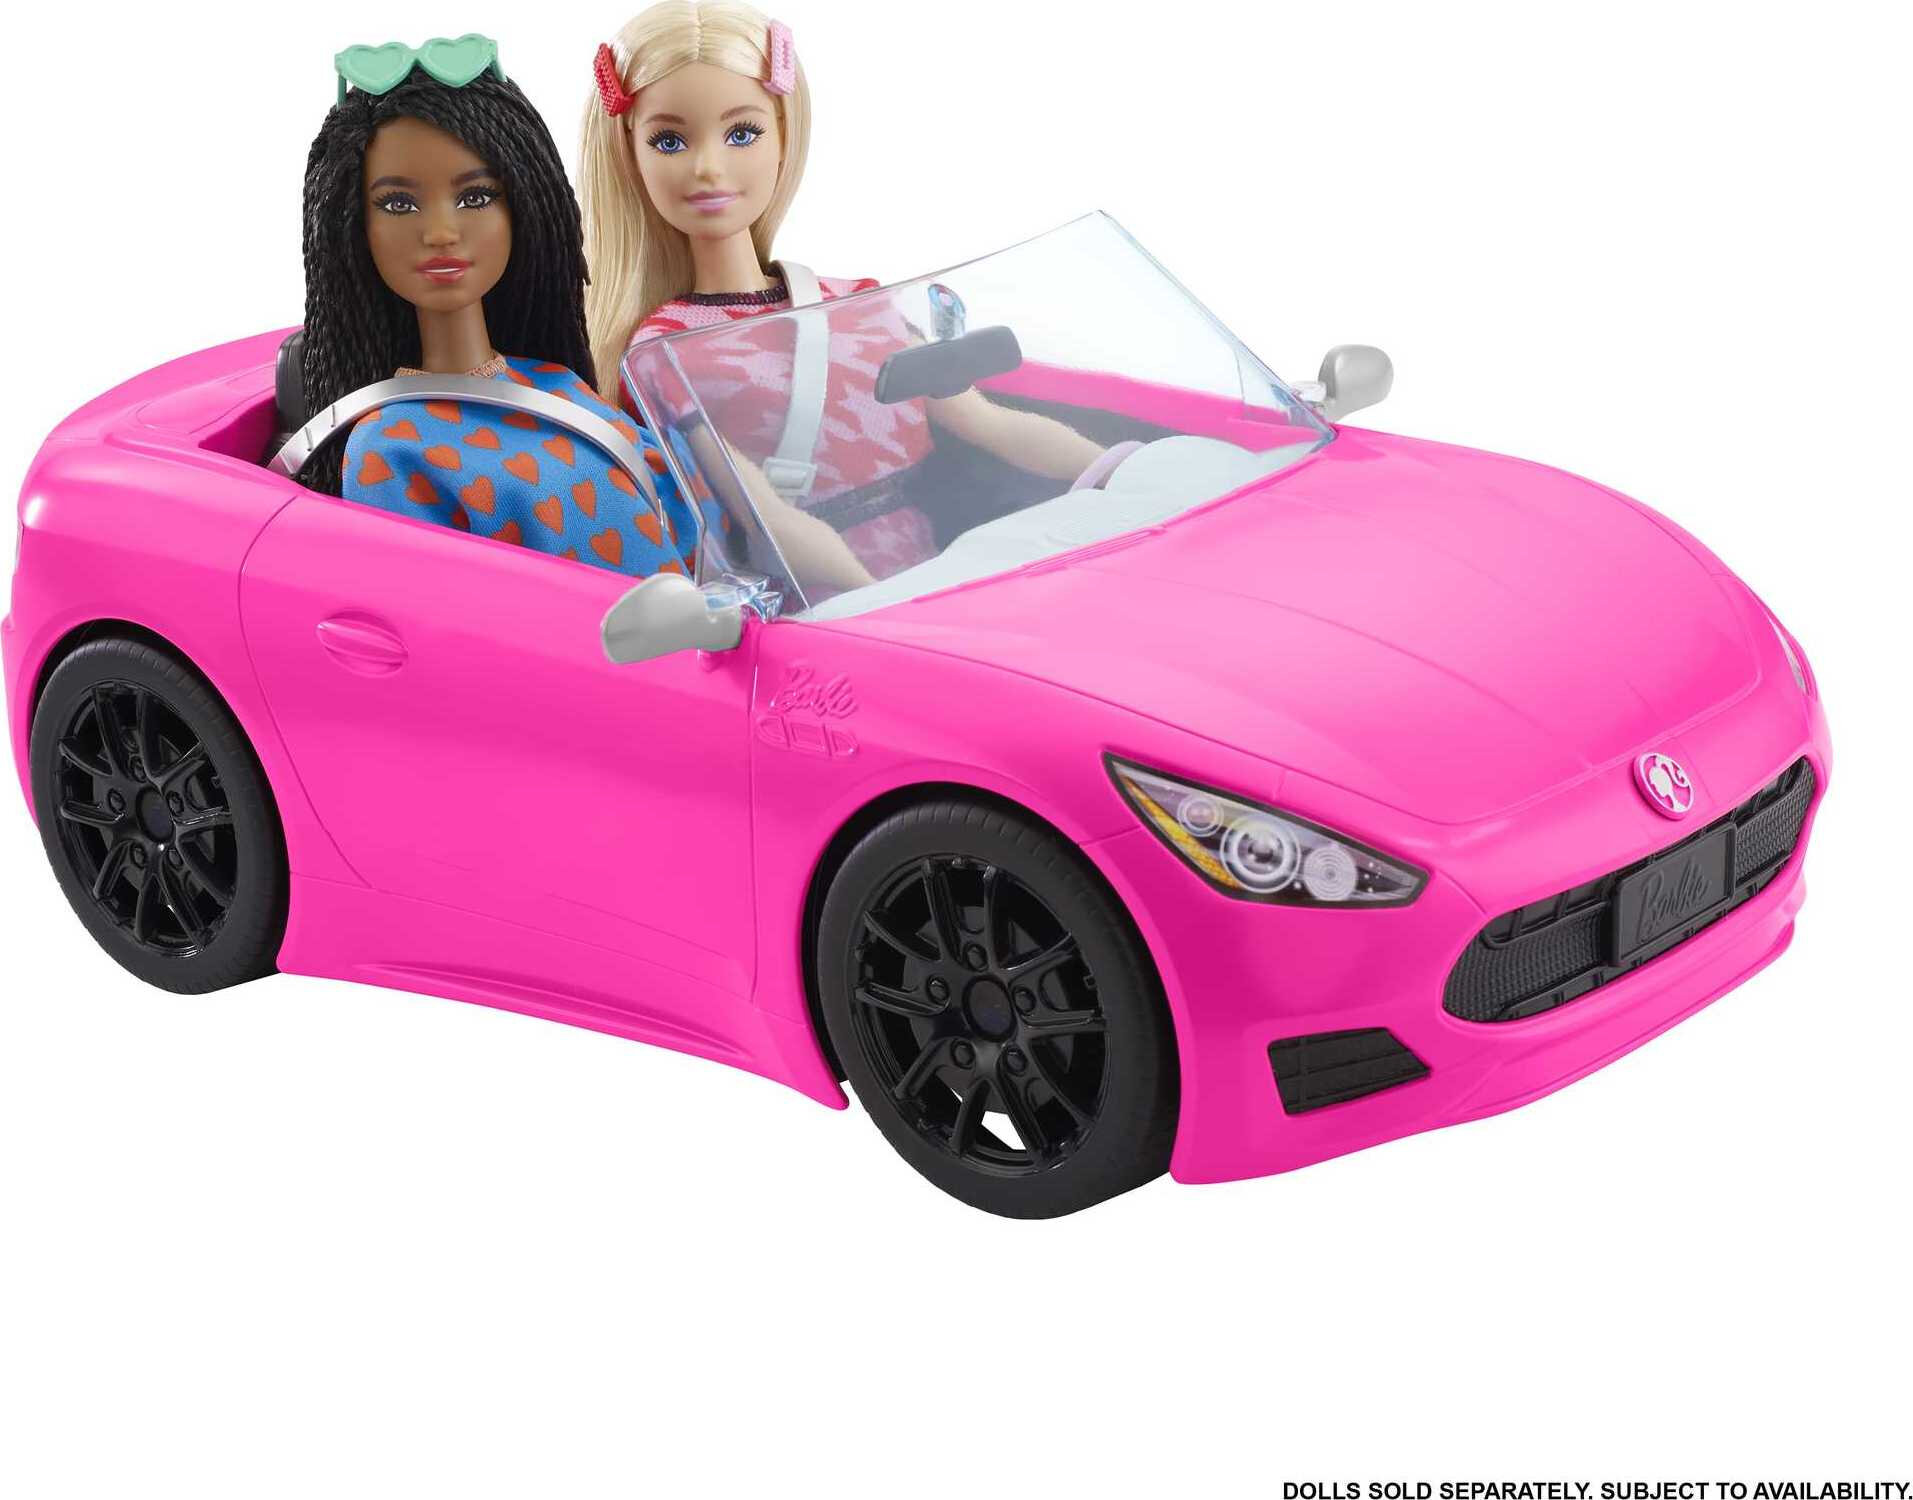 Barbie Convertible Toy Car, Bright Pink with Seatbelts and Rolling Wheels (Seats 2 Dolls), Toy for 3 Years and Up - image 2 of 6